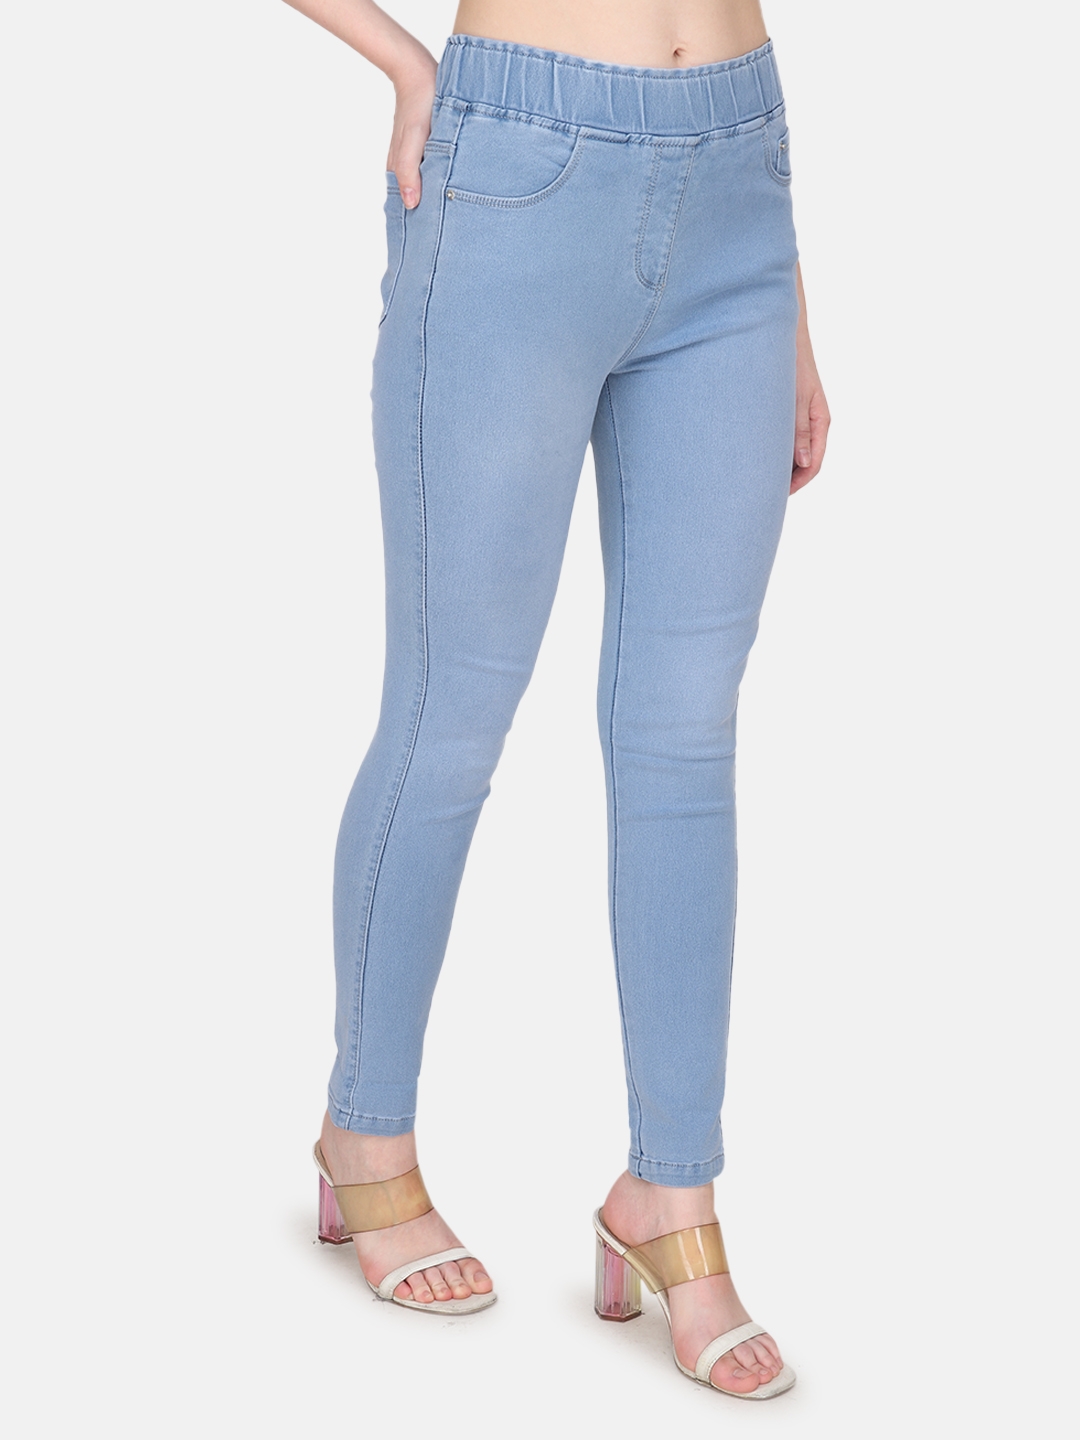 Albion | Albion By CnM Women Stretchable Light Blue Denim Jegging 2